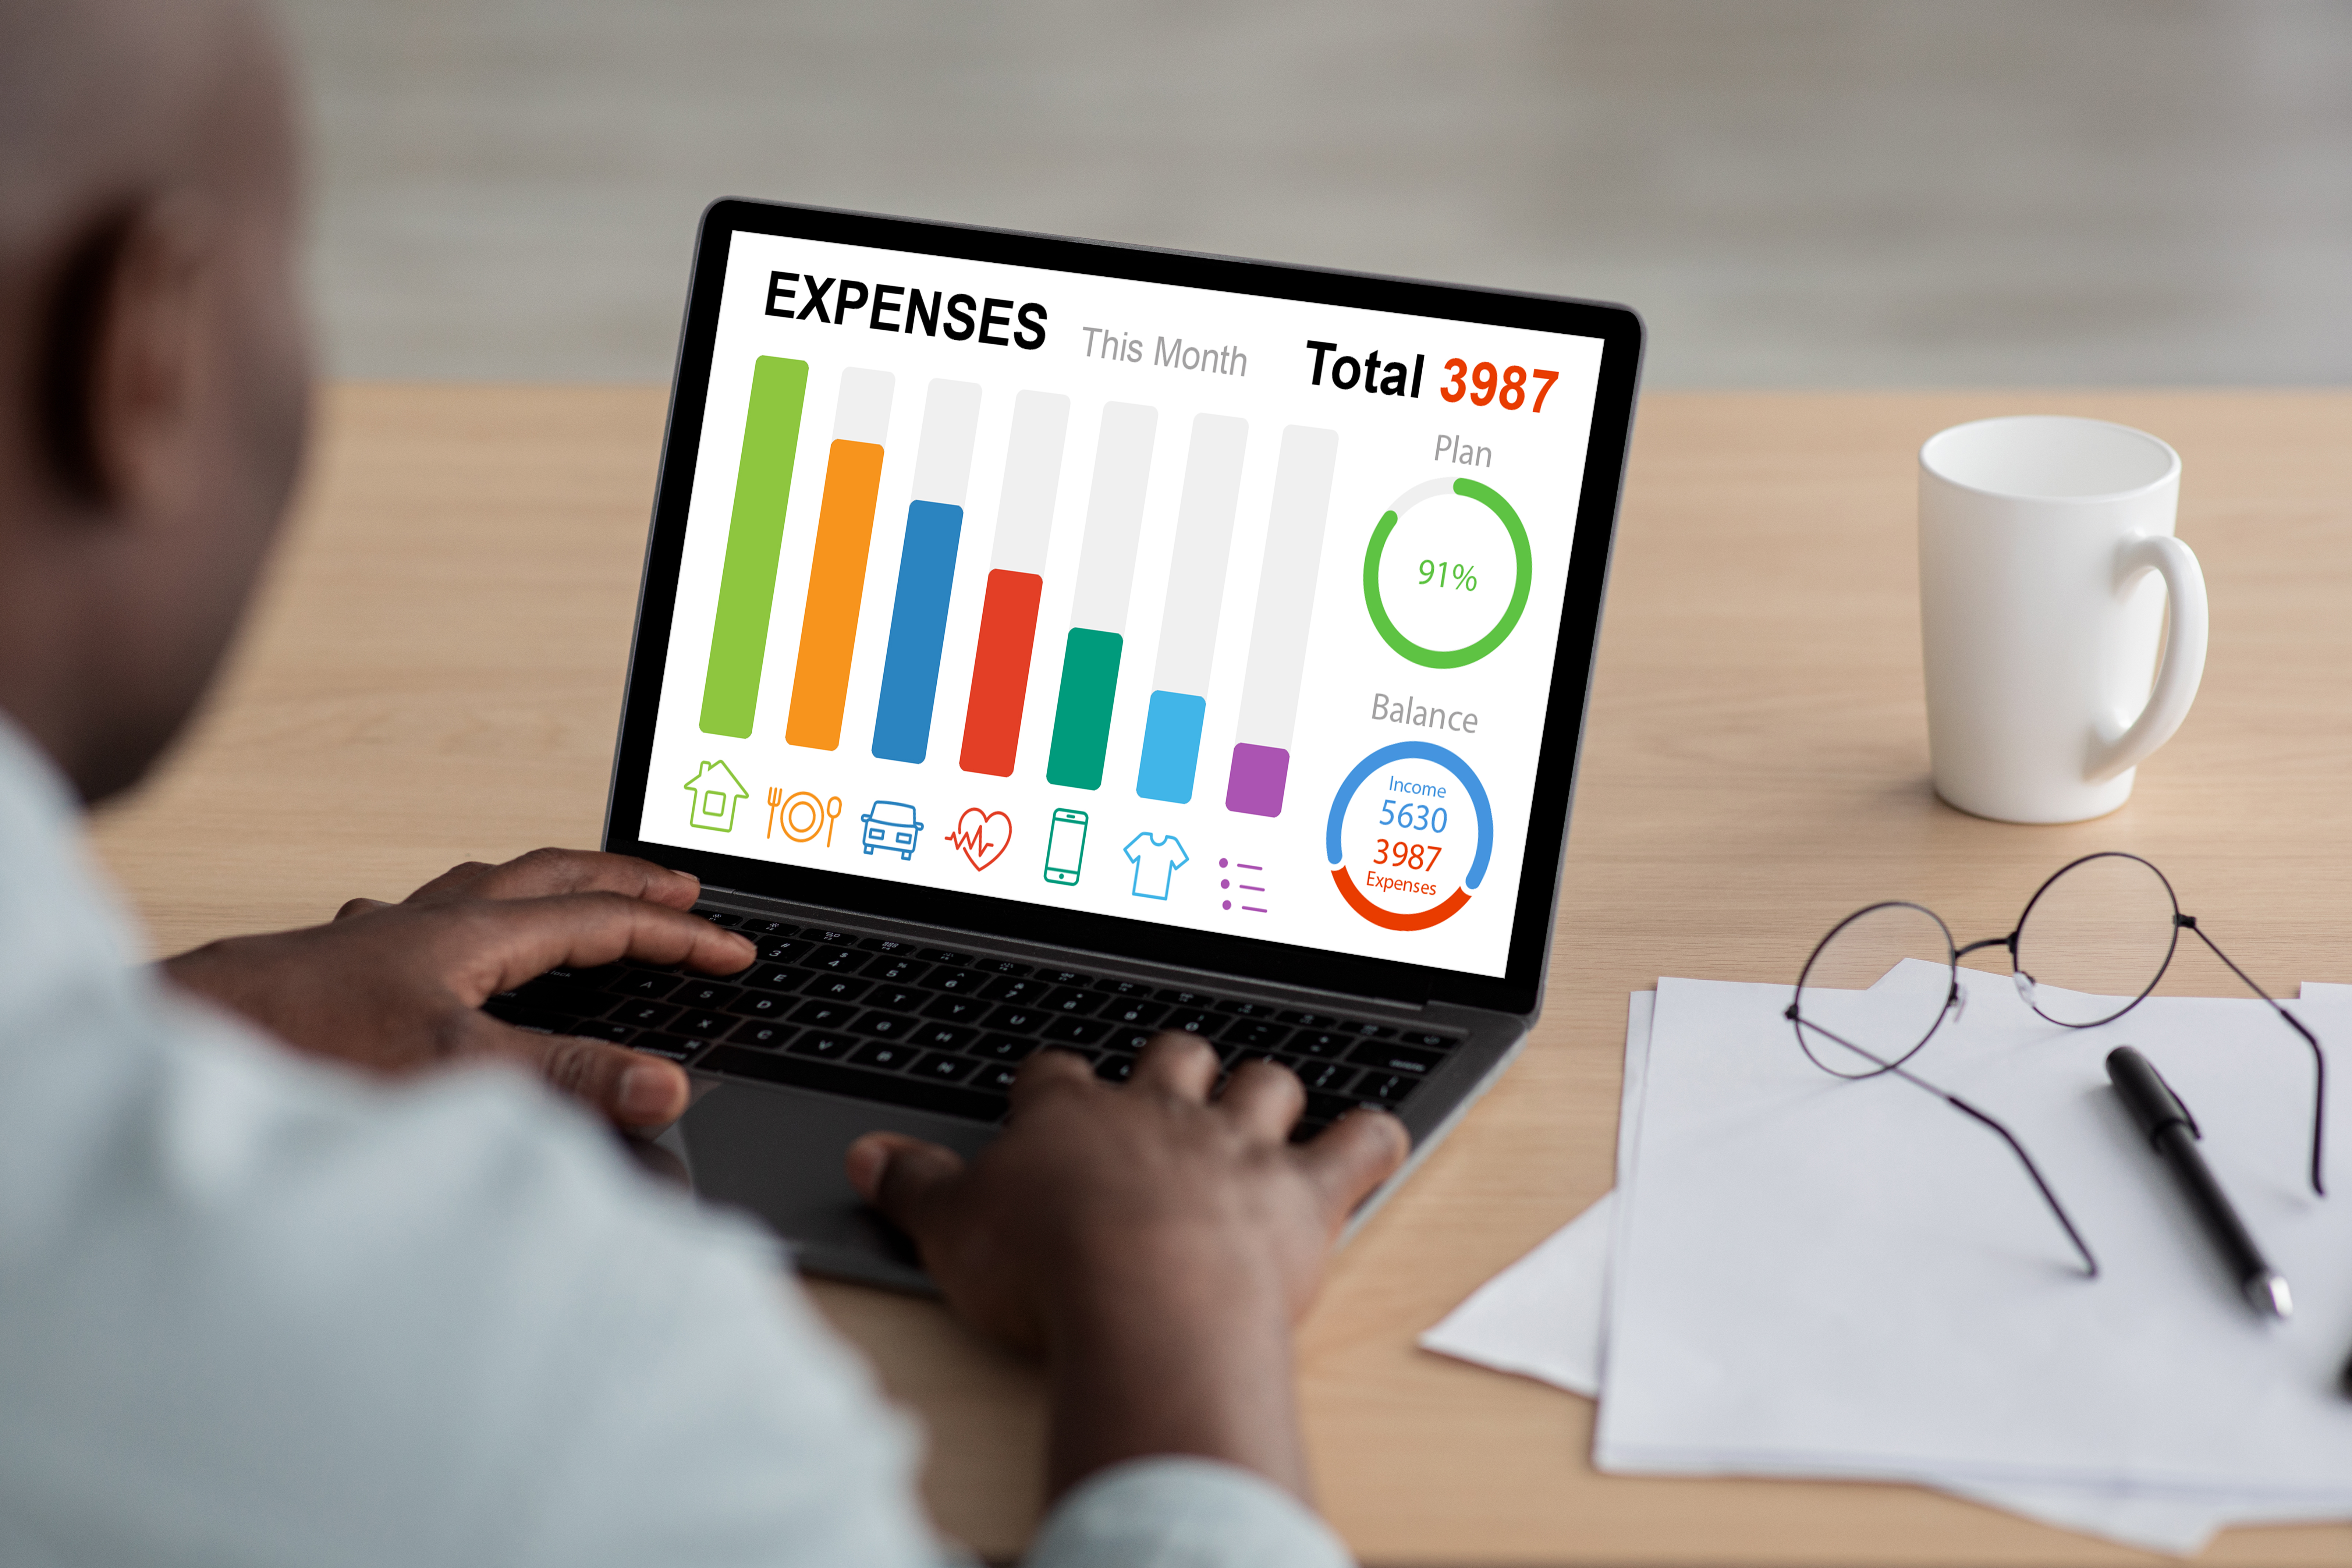 Keeping track of your expenses can help you stay on target